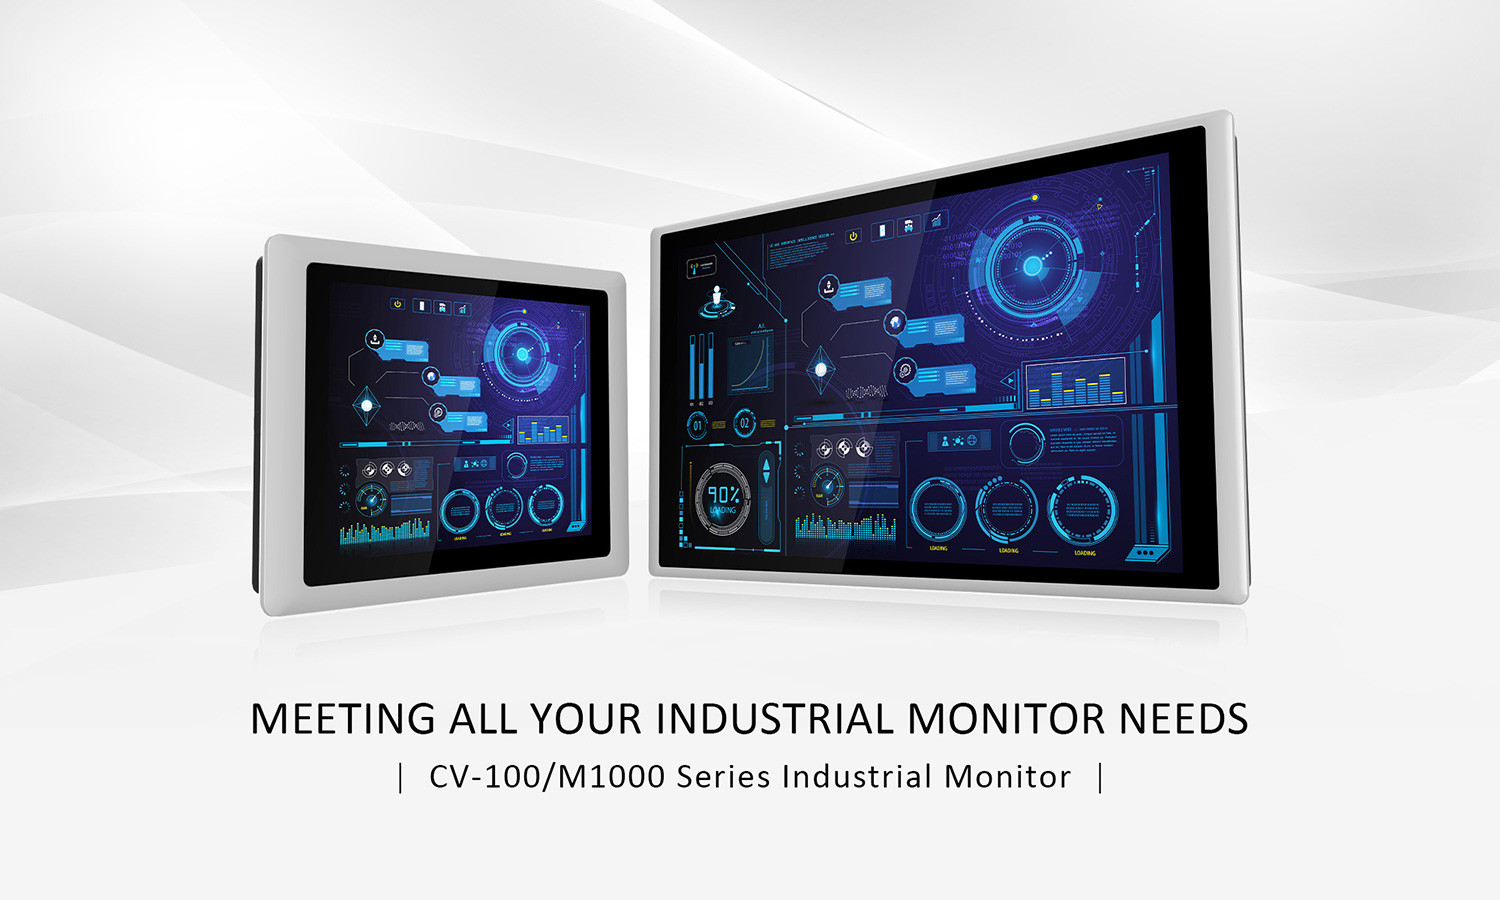 Meeting All Your Industrial Monitor Needs, CV-100 / M1000 Series Industrial Monitor